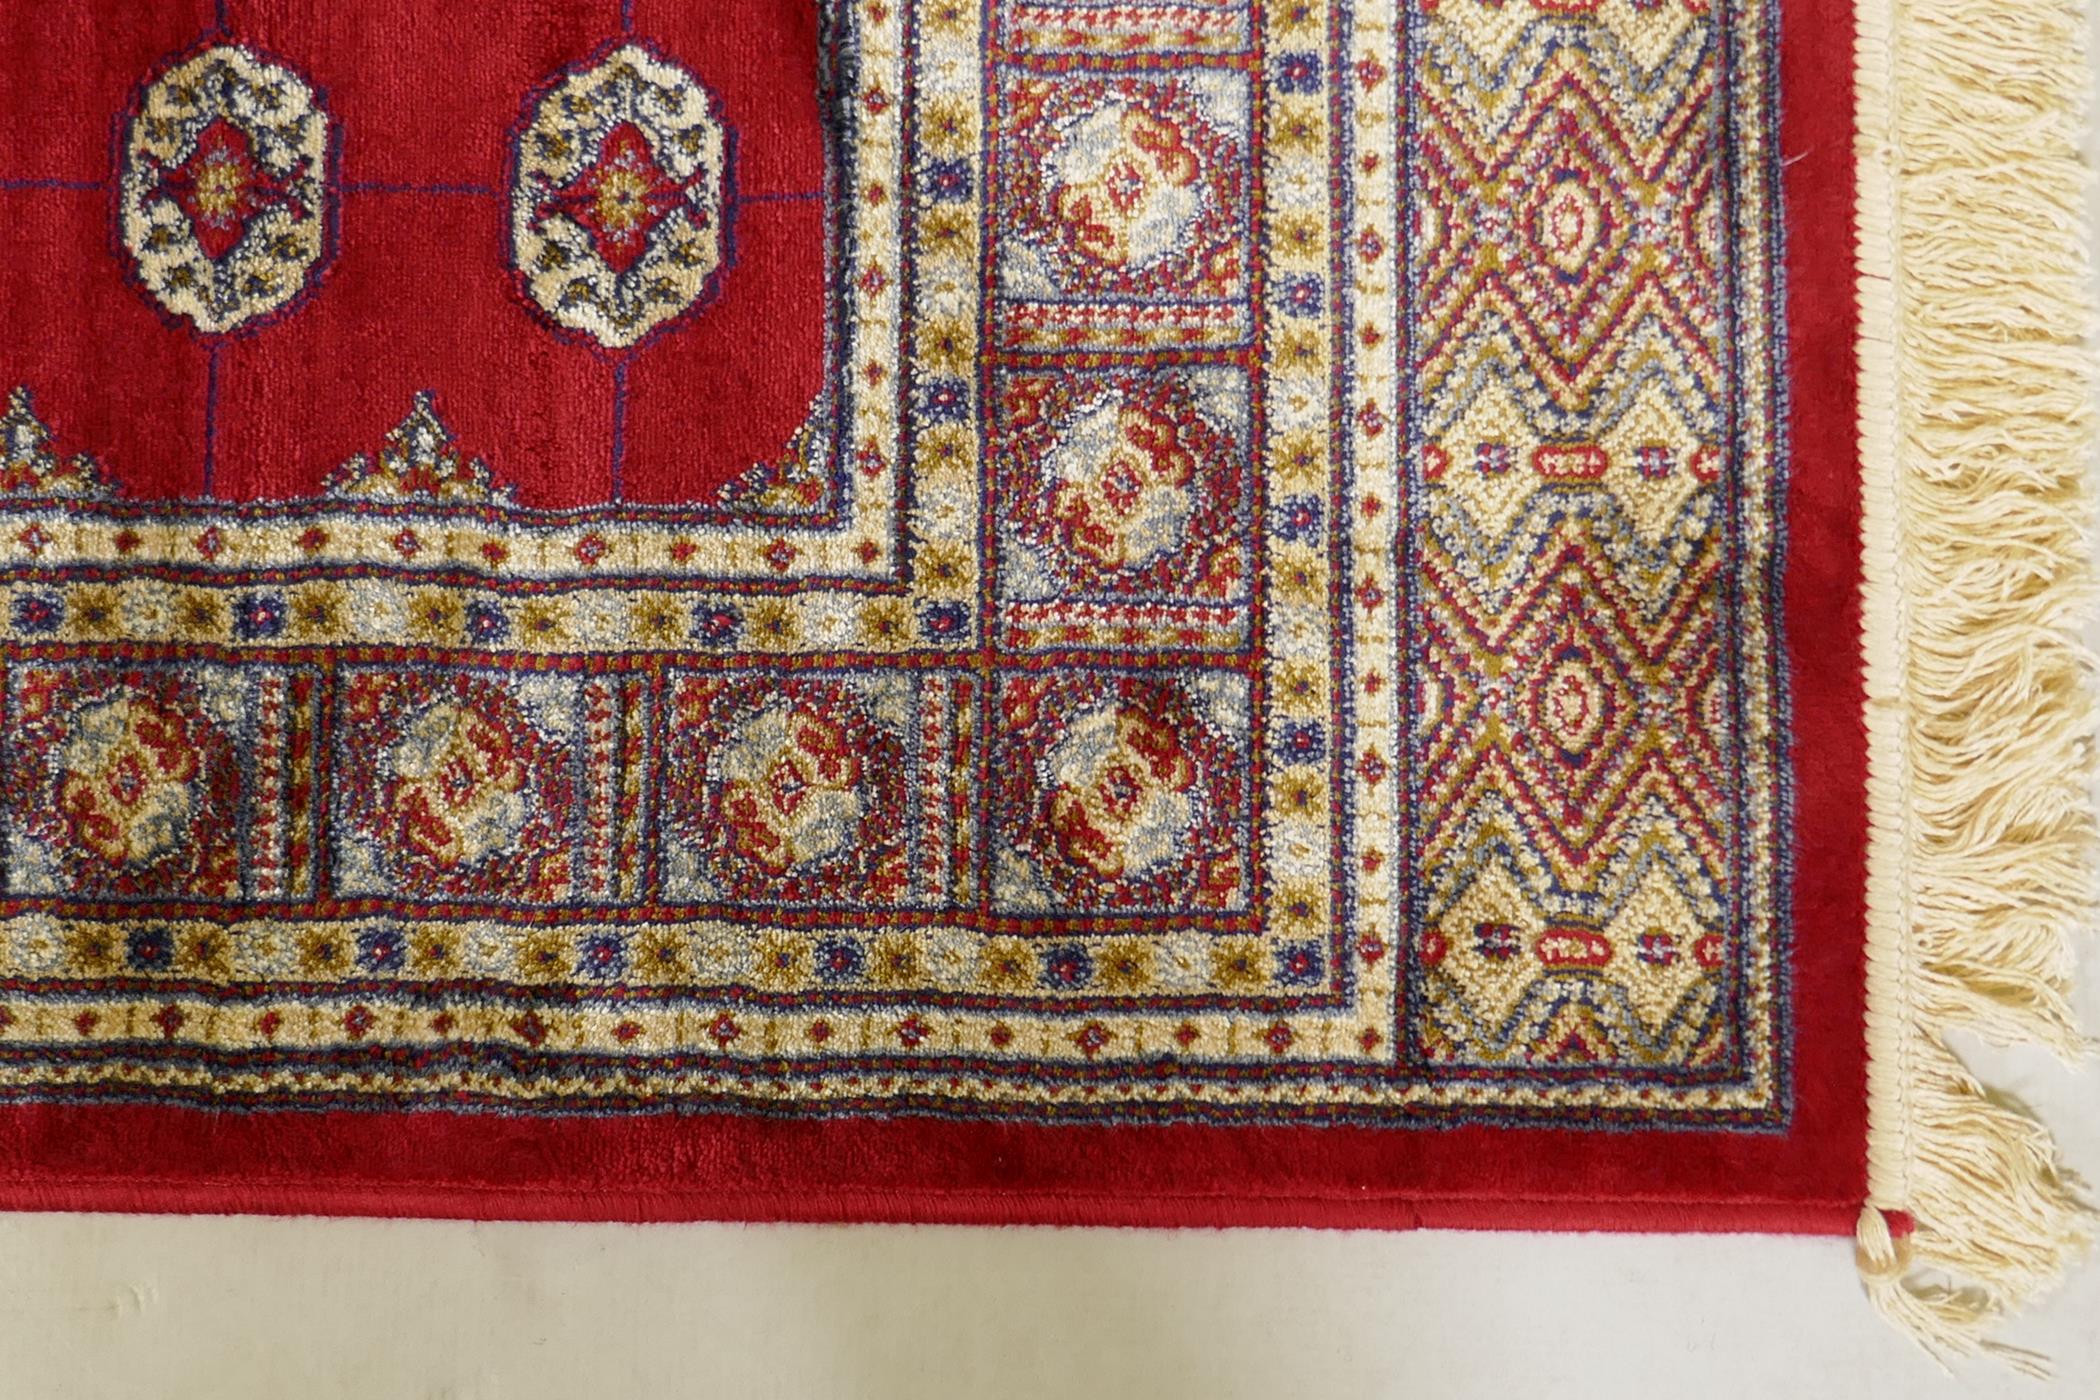 A rich red ground Kashmir rug with a Bokhara design, 47" x 69" - Image 4 of 6